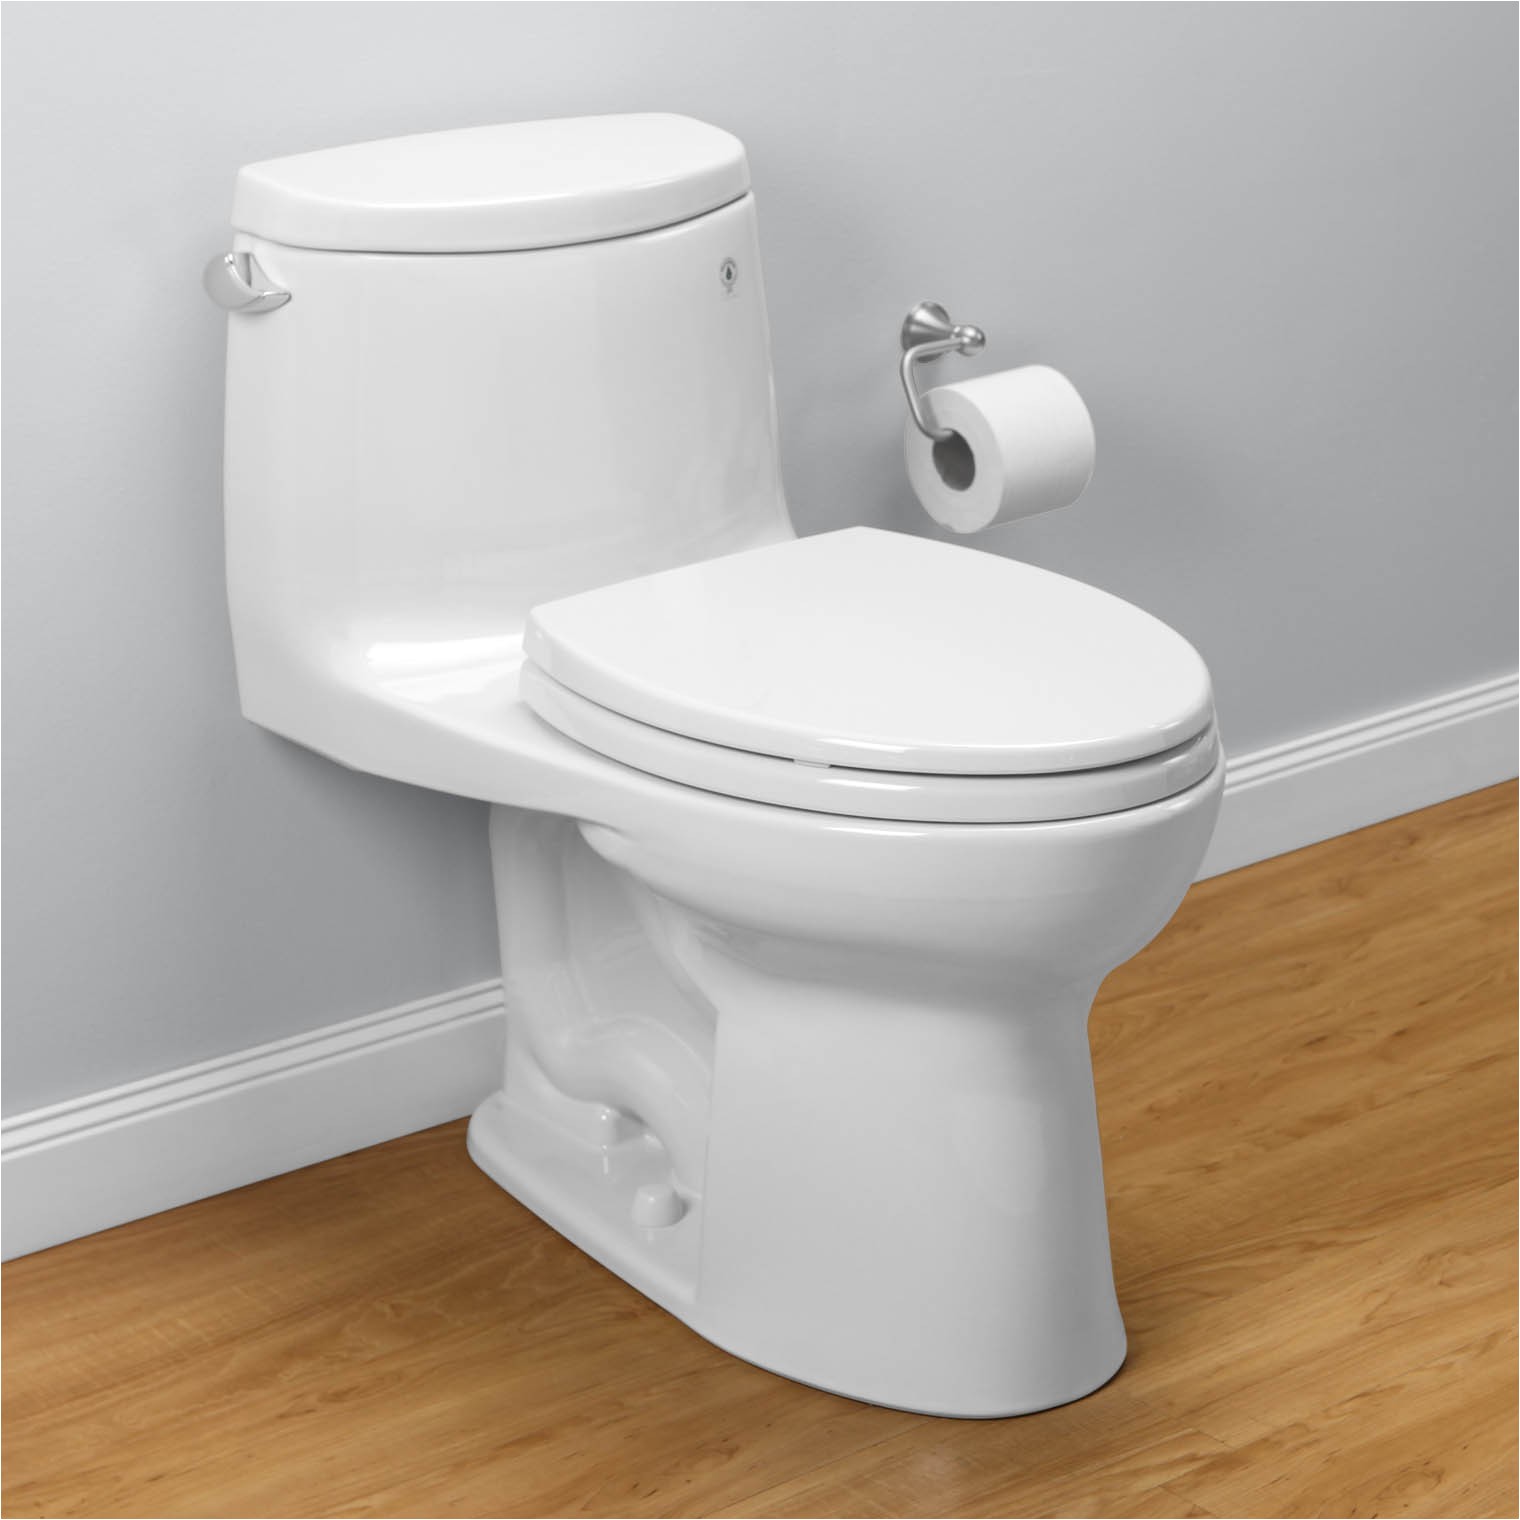 Toto Ultramax Ii Review toto Ultramax Ii Review is It Worth Buying Shop toilet